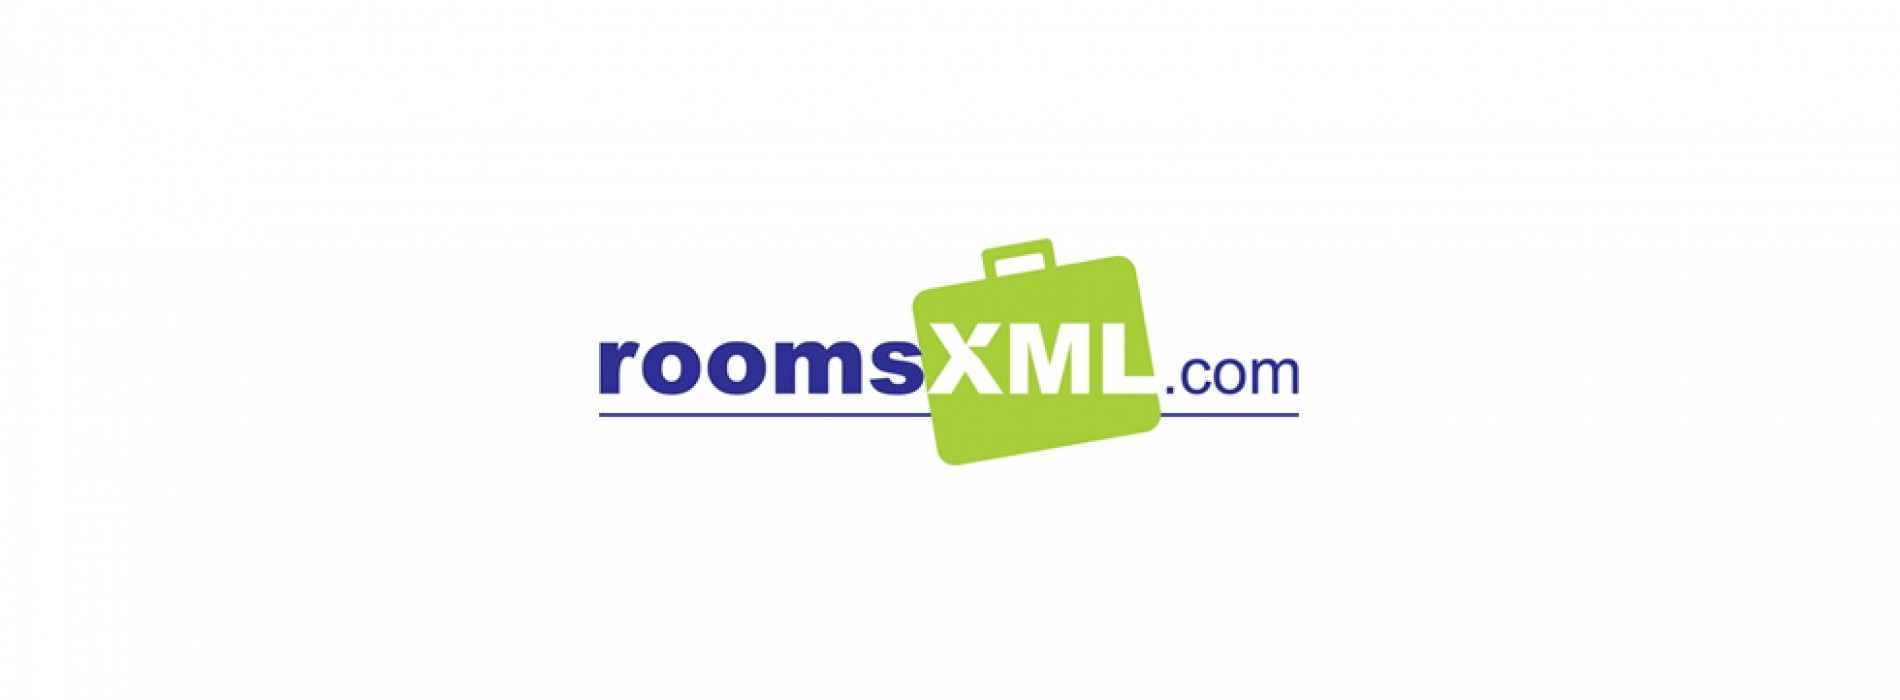 Its upgrade time at roomsXML.com